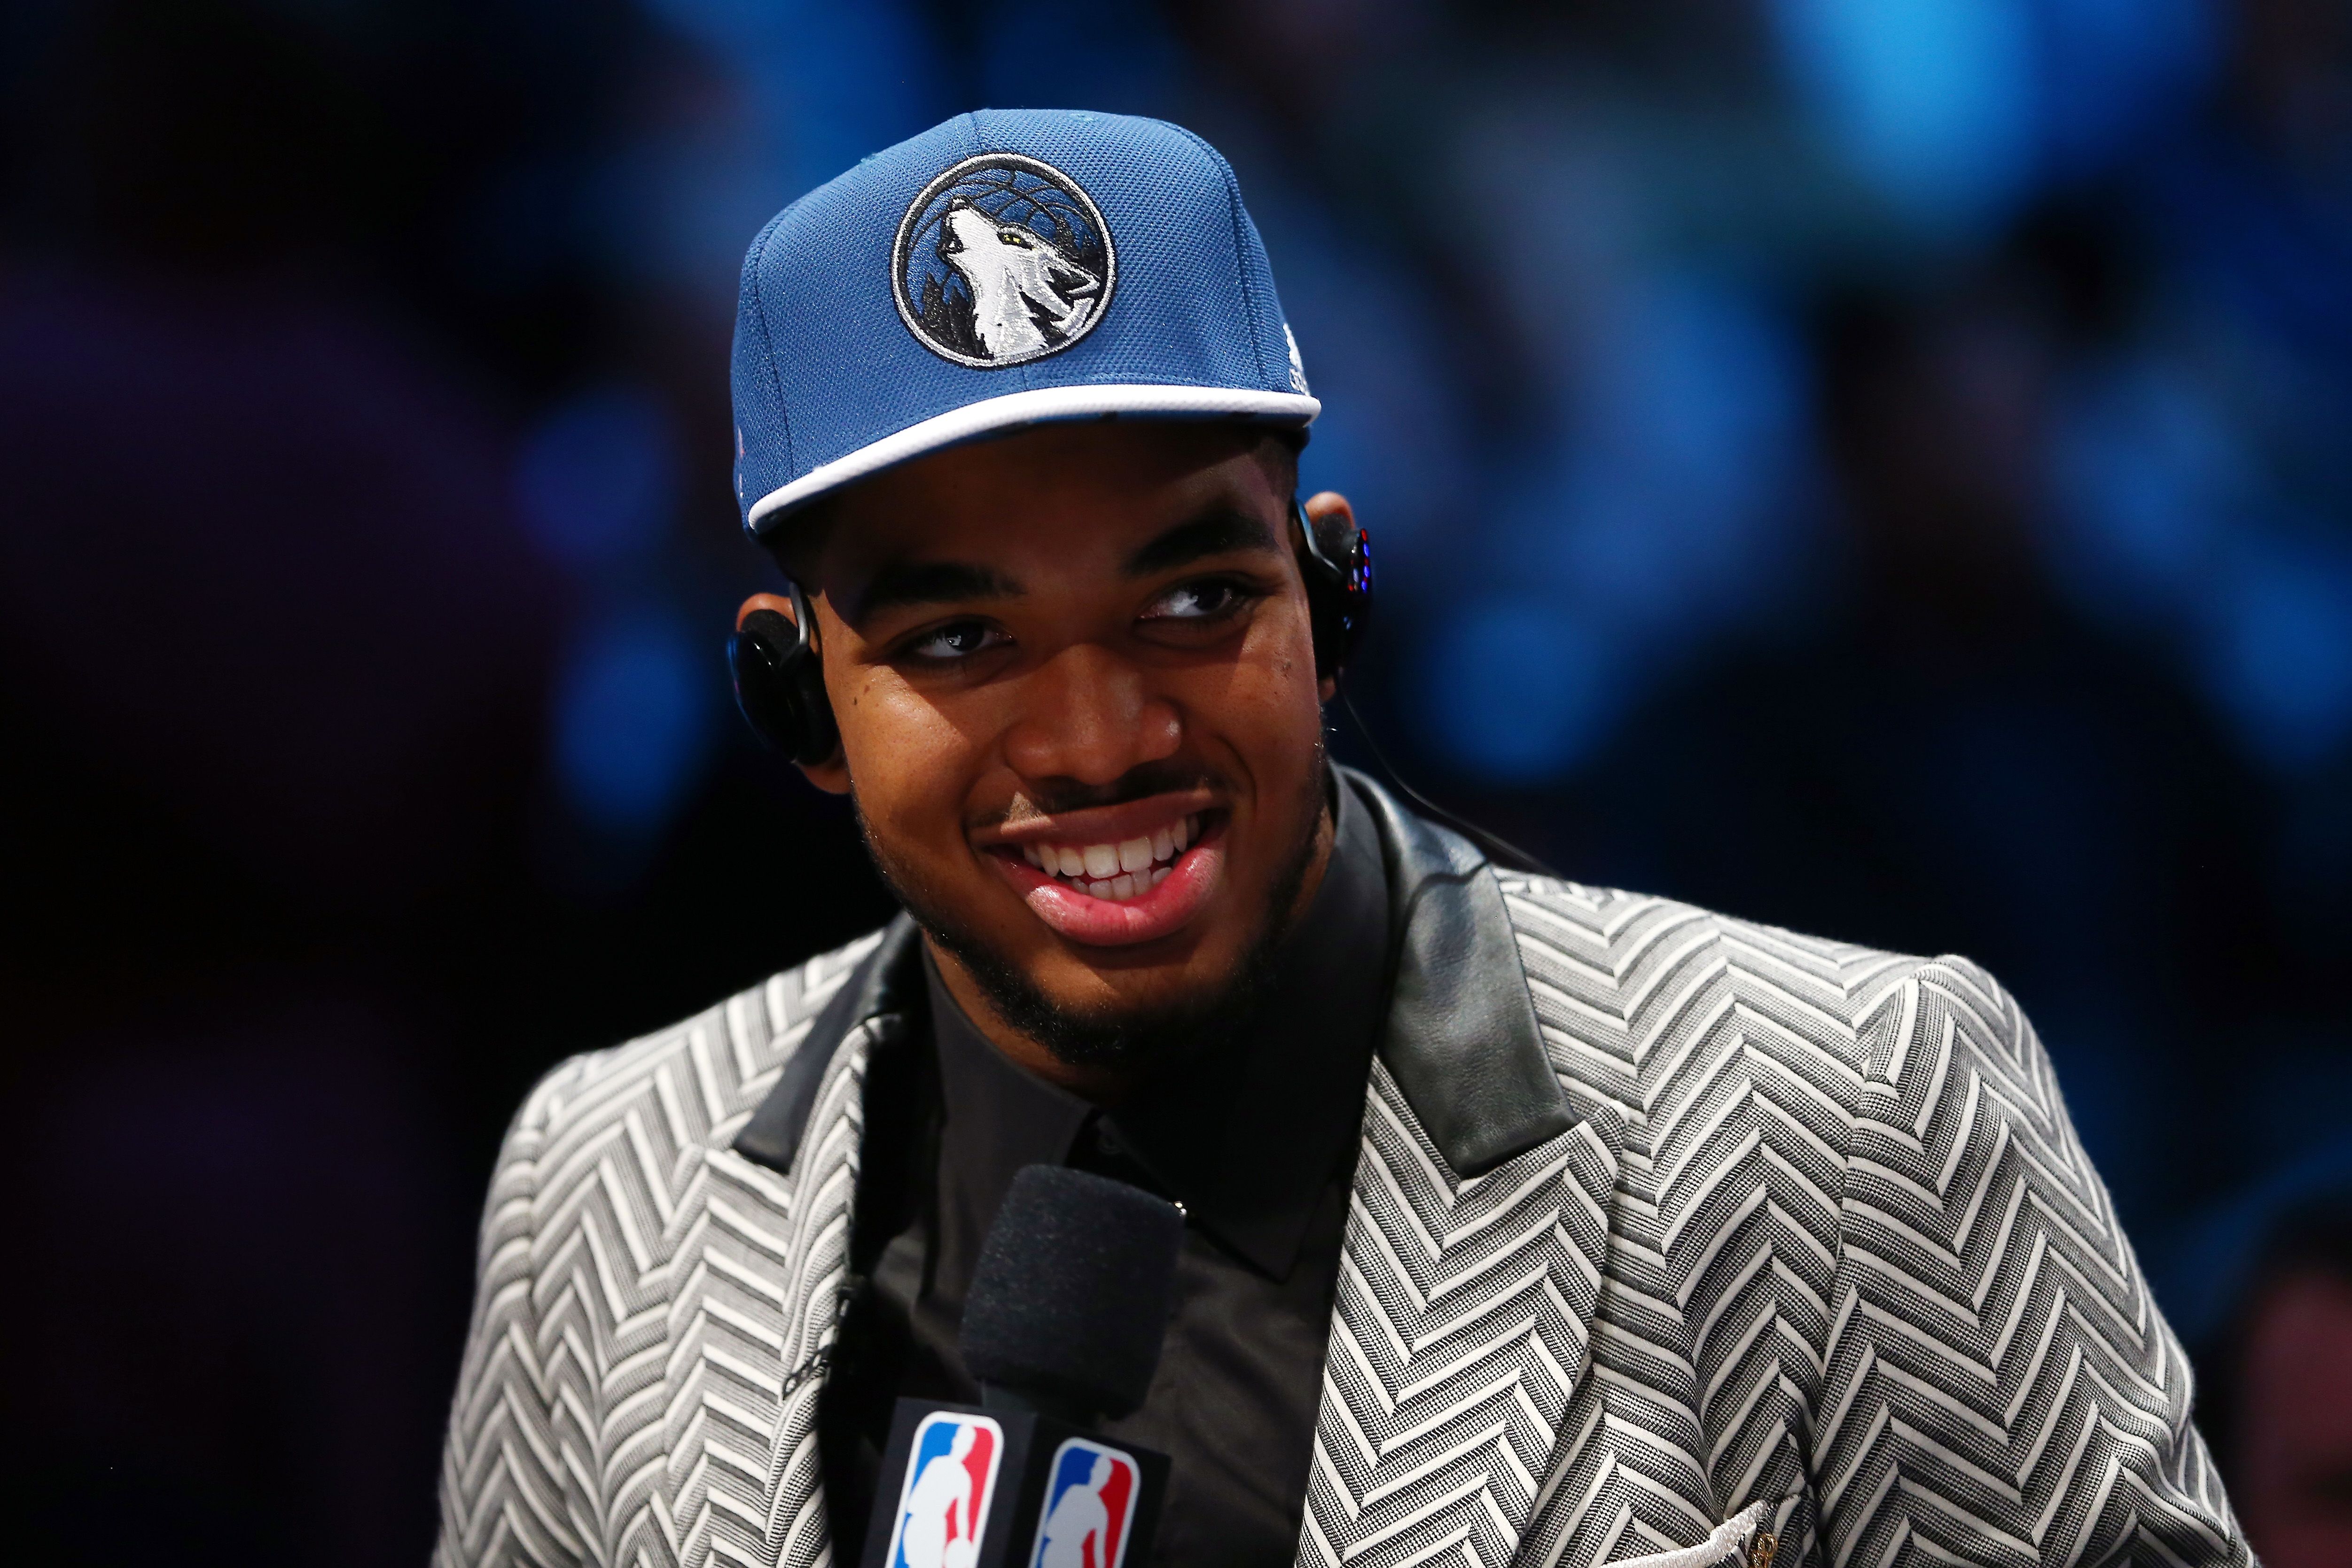 Karl-Anthony Towns thanked the NBA for allowing him to wear his